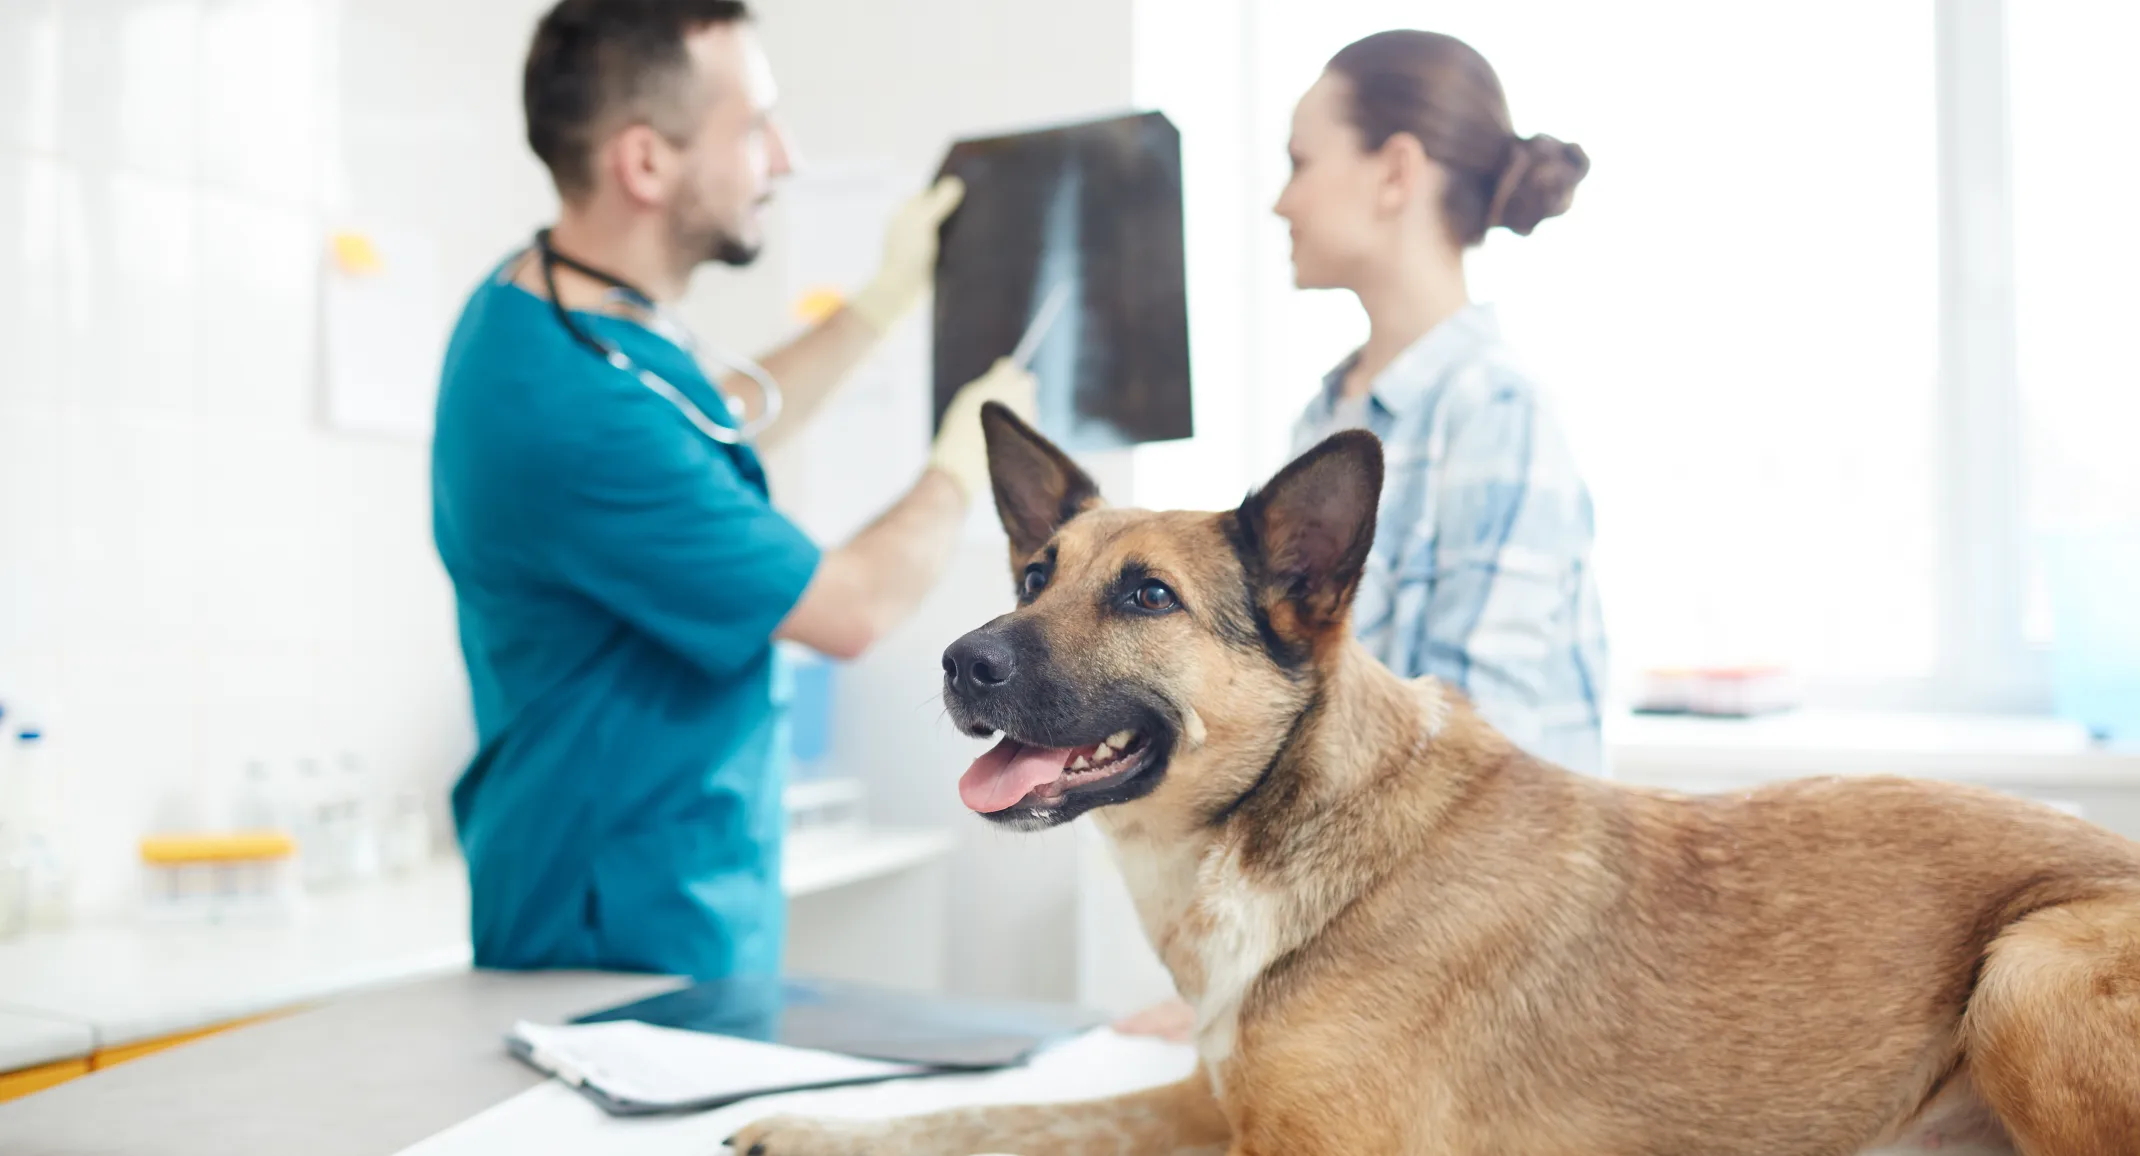 Dog on table while doctors look at x-ray